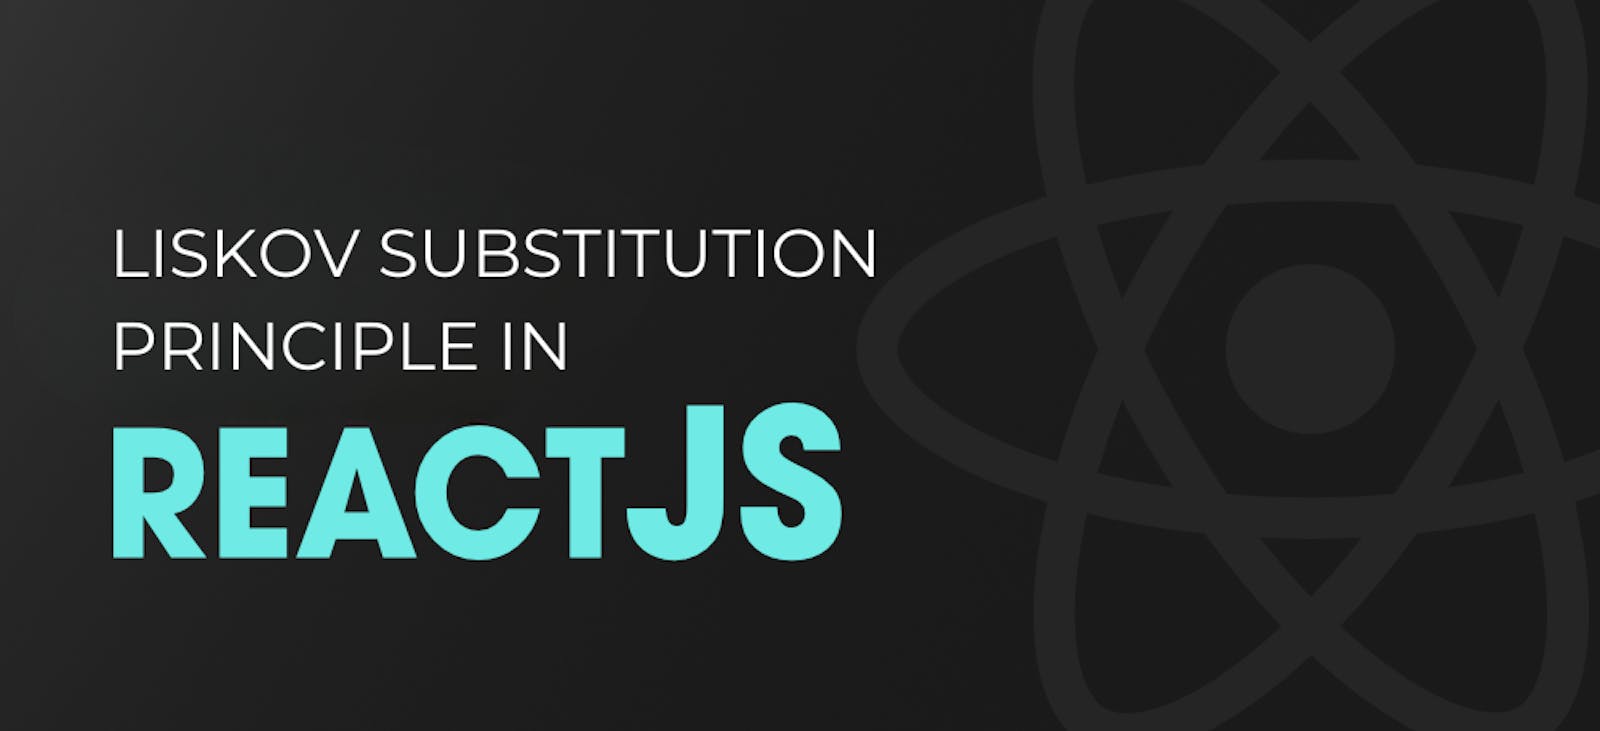 Using the Liskov Substitution Principle (LSP) in React